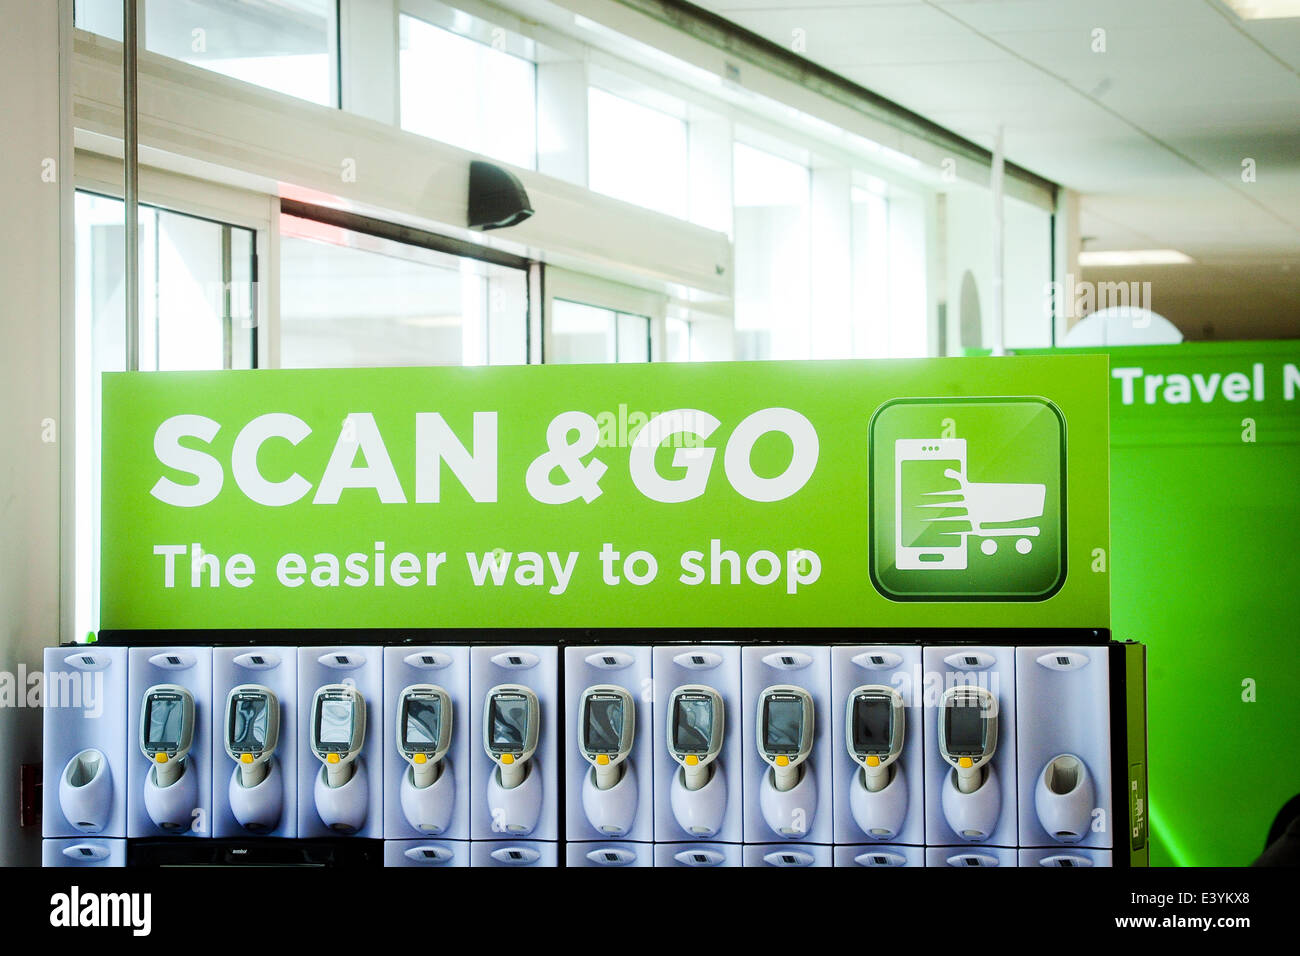 scan and go scanners in supermarket Stock Photo